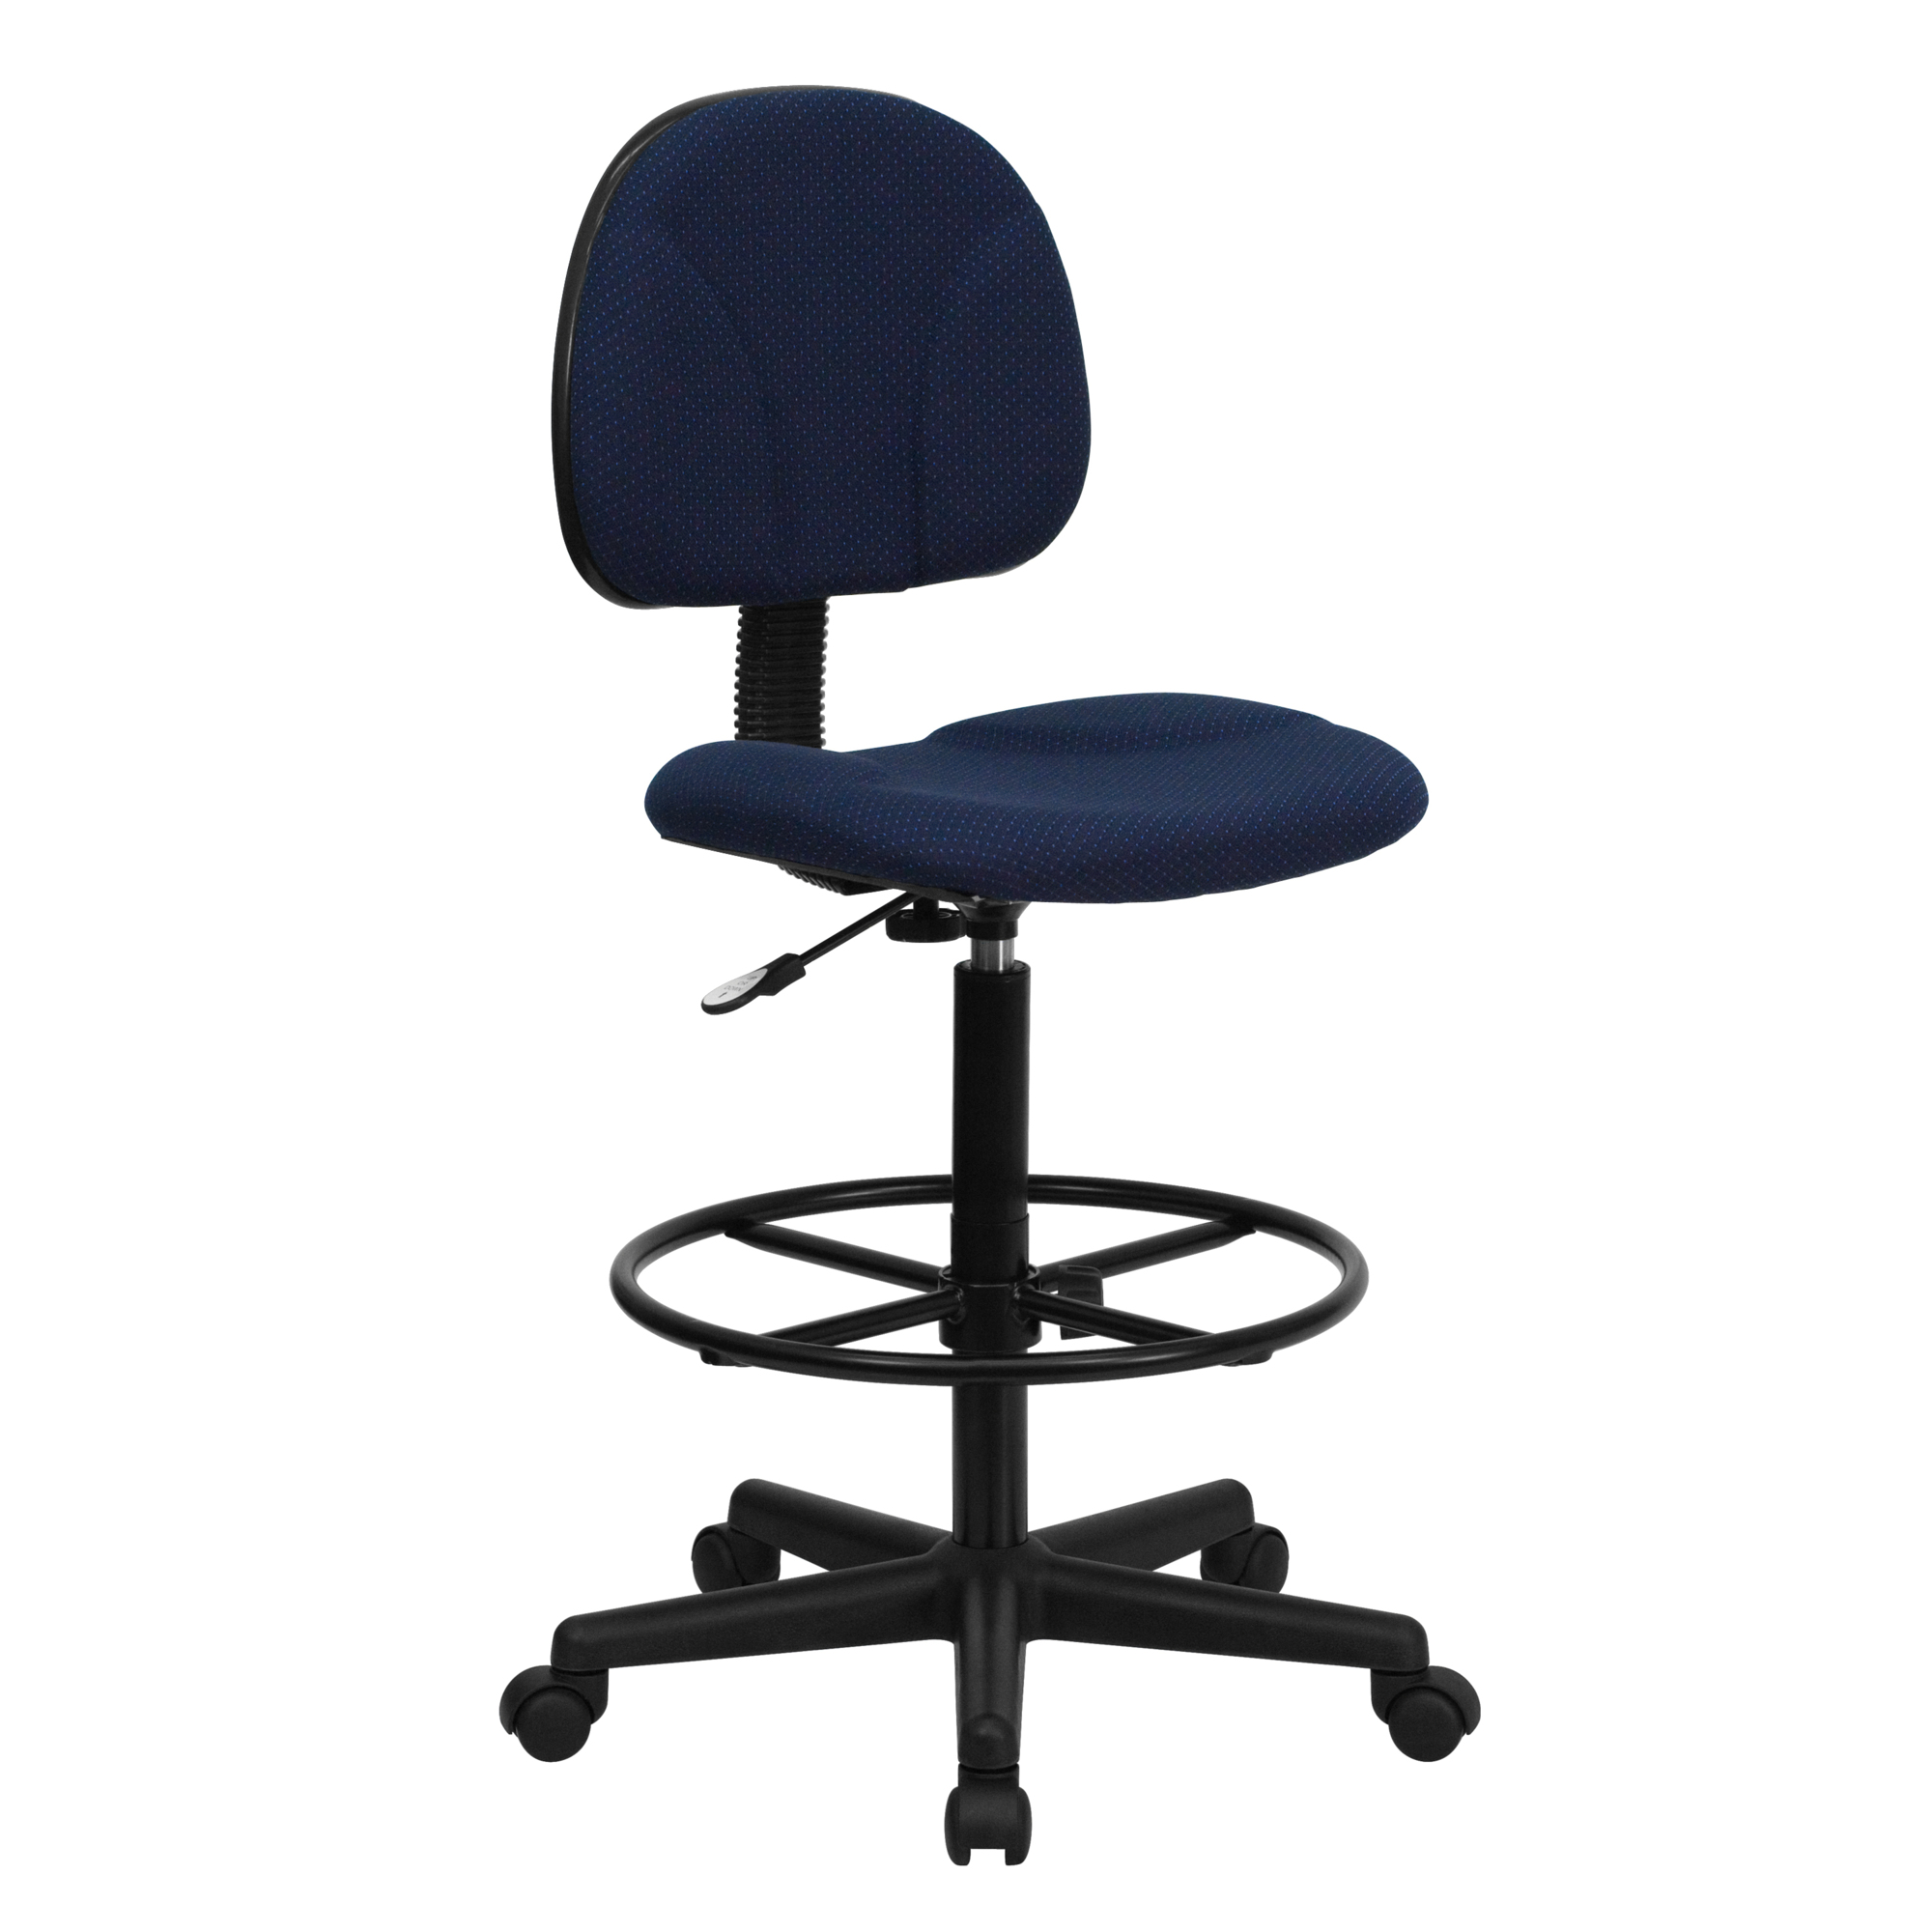 Flash Furniture, Navy Blue Patterned Fabric Drafting Chair - Office, Primary Color Blue, Included (qty.) 1, Model BT659NVY